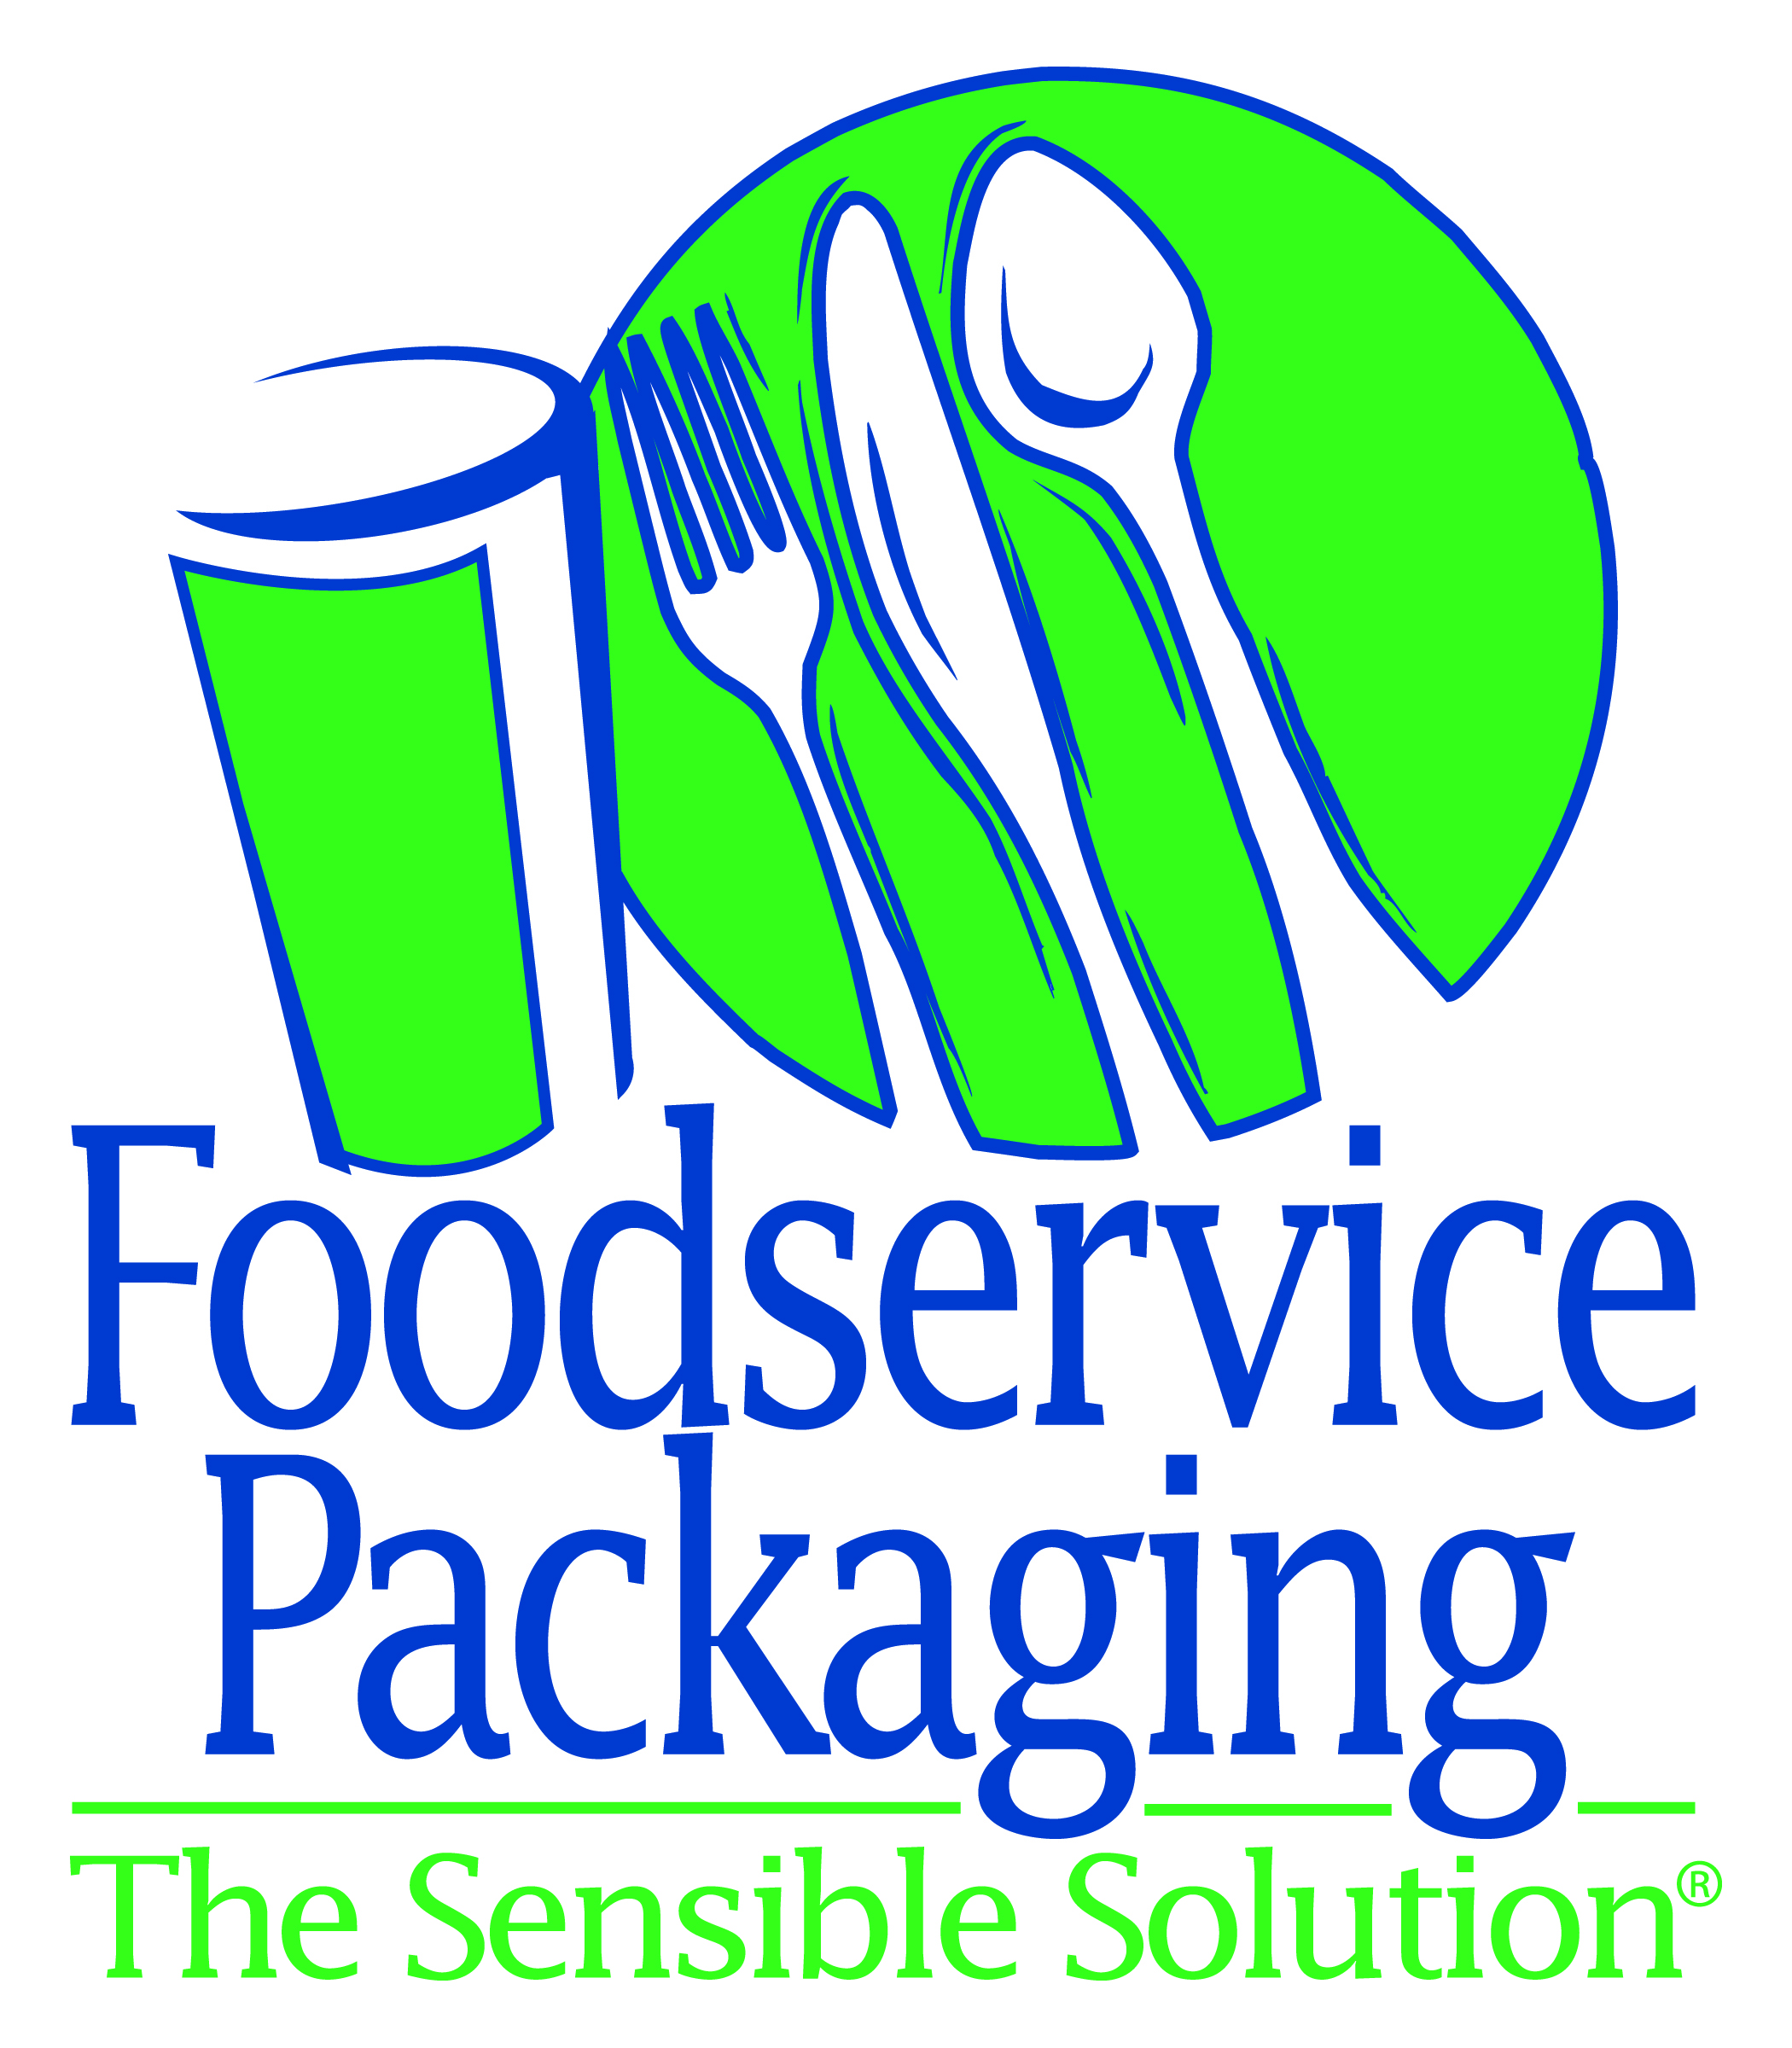 Serving as the voice of the industry to educate and influence stakeholders, FPI provides a legal forum to address the challenges and opportunities facing the foodservice packaging industry.